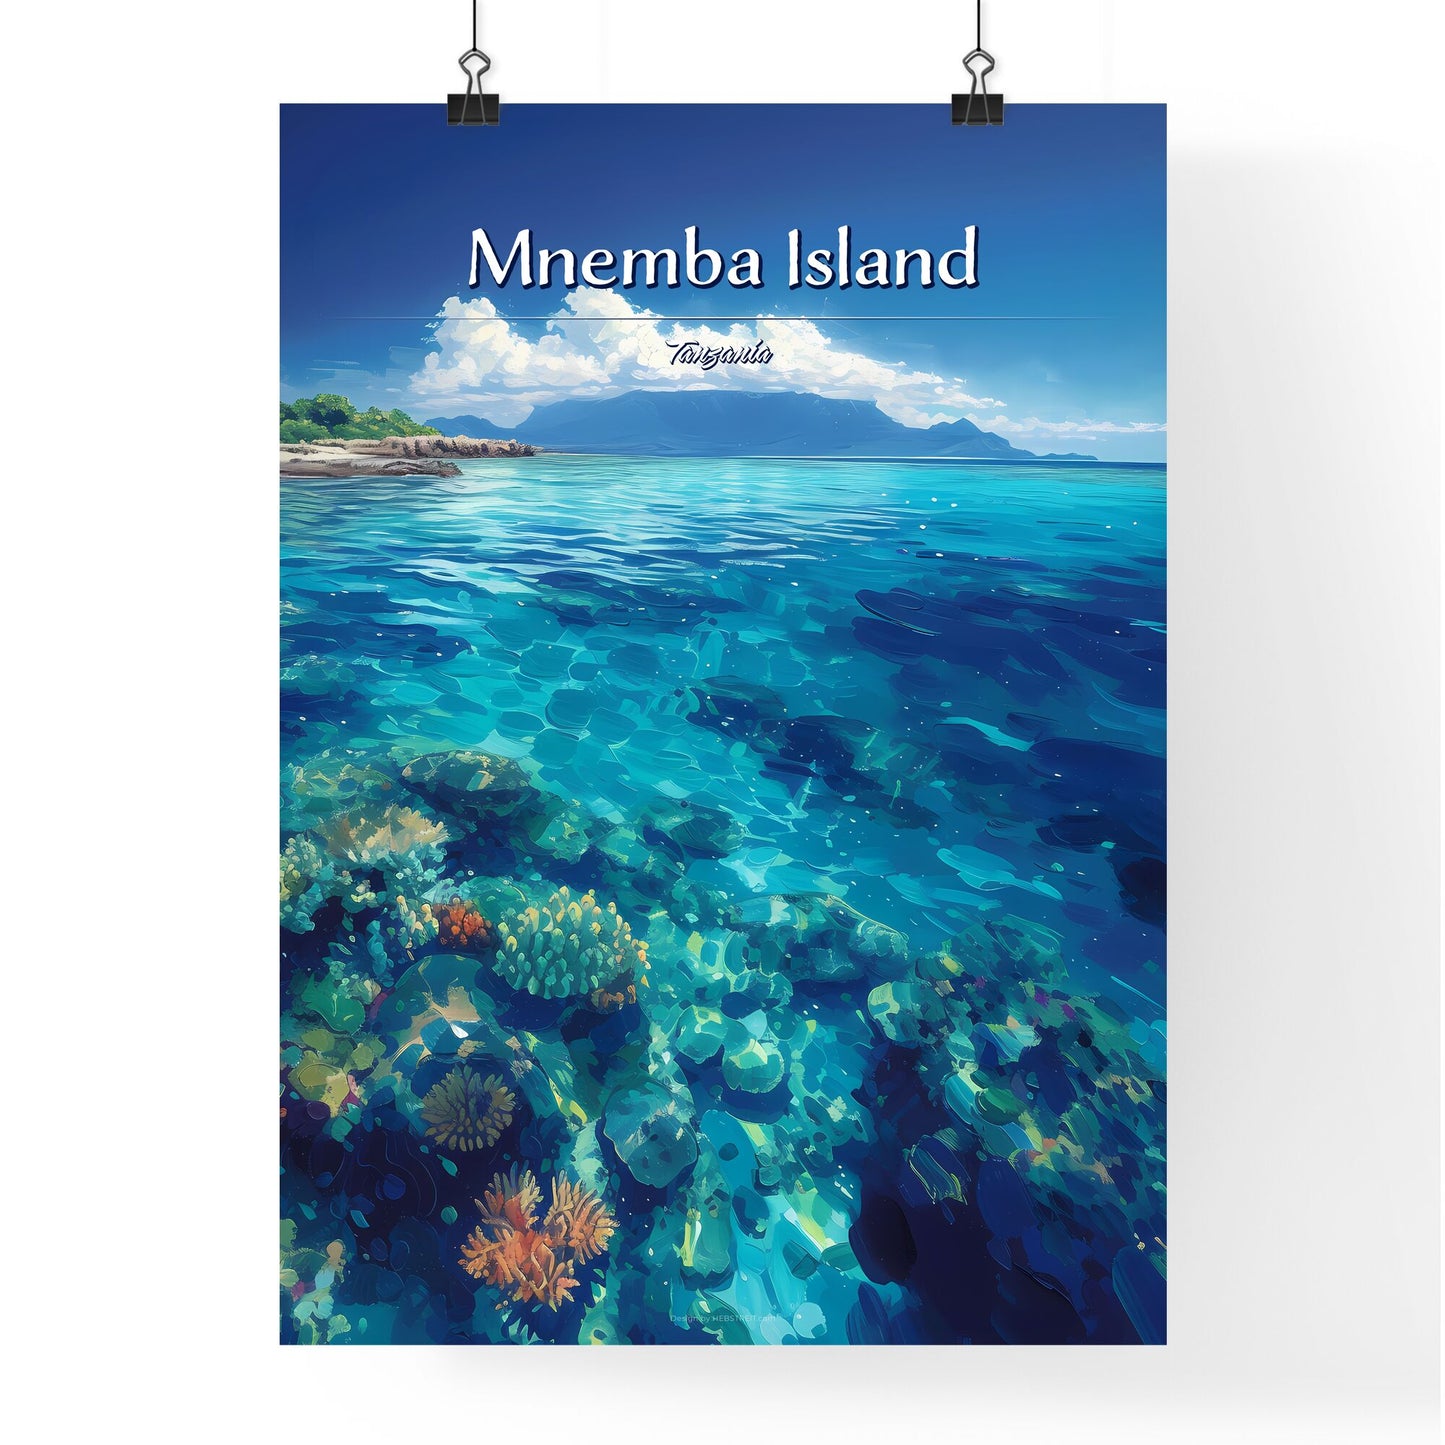 Mnemba Island, Tanzania - Art print of a coral reef in the water Default Title